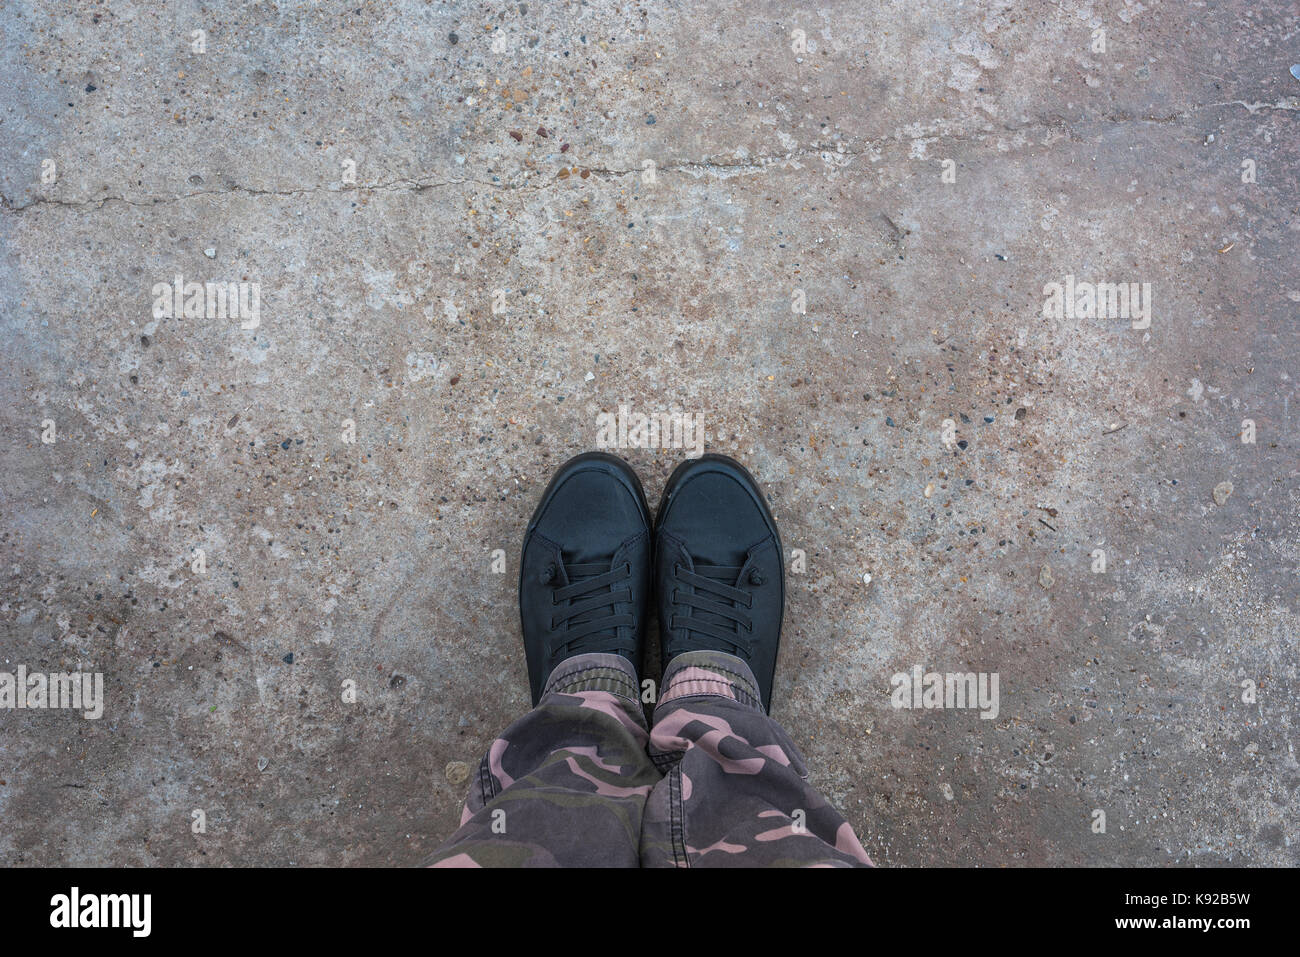 Modern new sneakers on concrete sidewalk surface, young person standing on the street Stock Photo